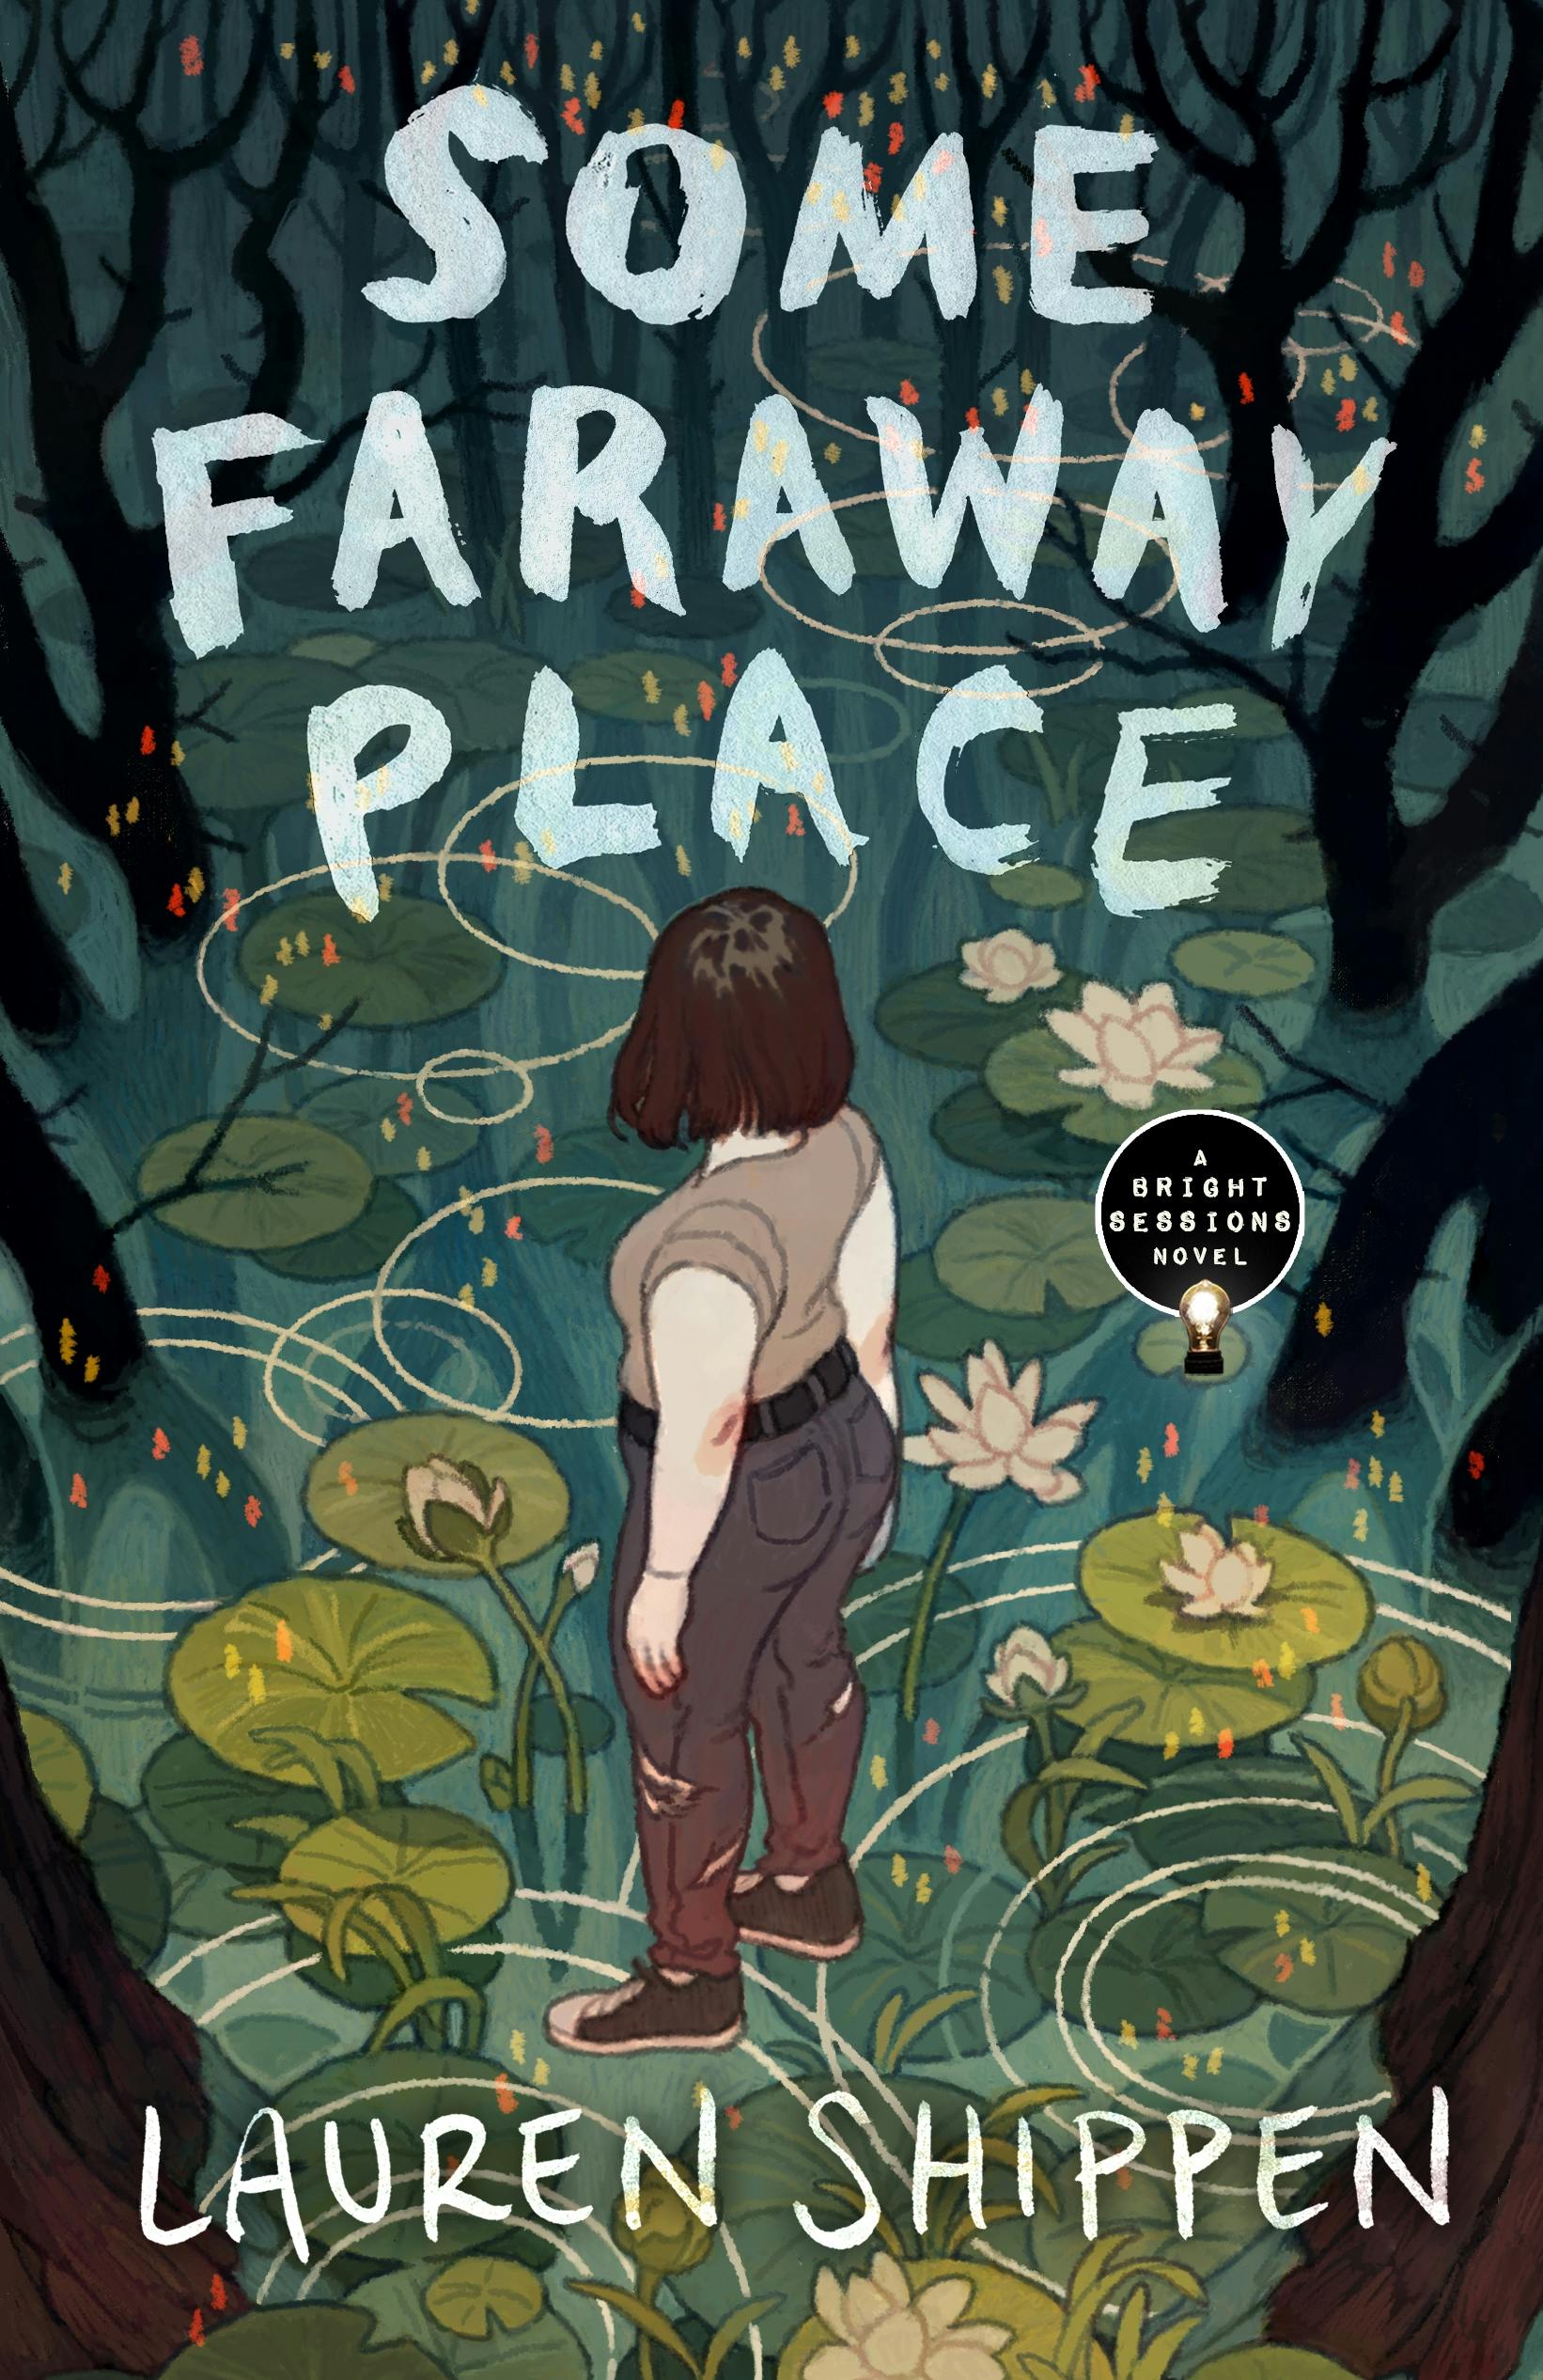 Cover for the book titled as: Some Faraway Place